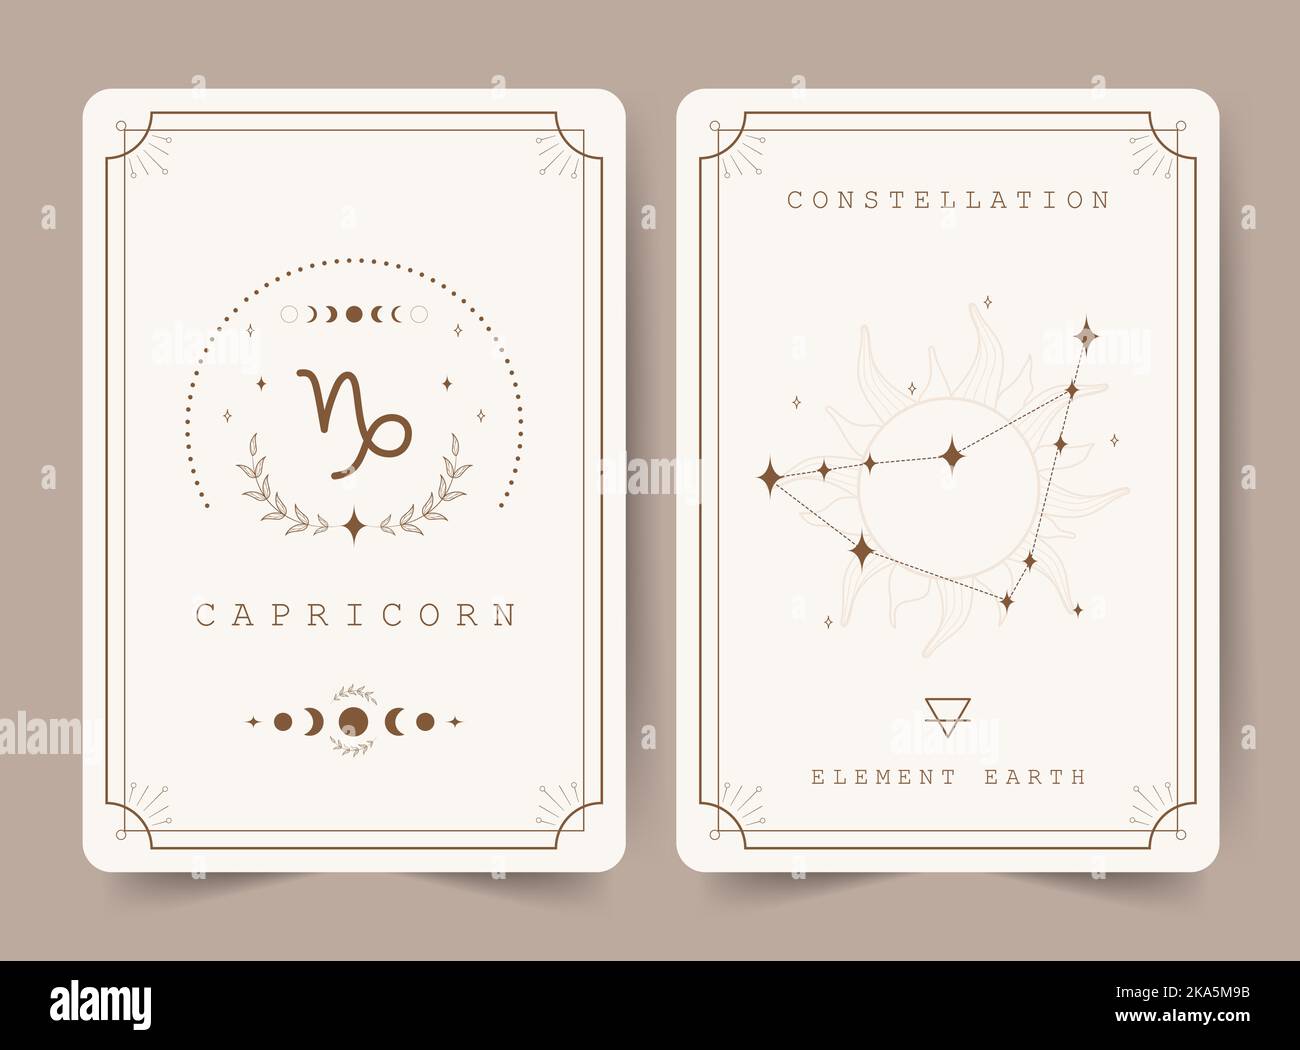 Capricorn. Witchcraft cards with astrology zodiac sign and constellation. Perfect for tarot readers and astrologers. Occult magic background Stock Vector